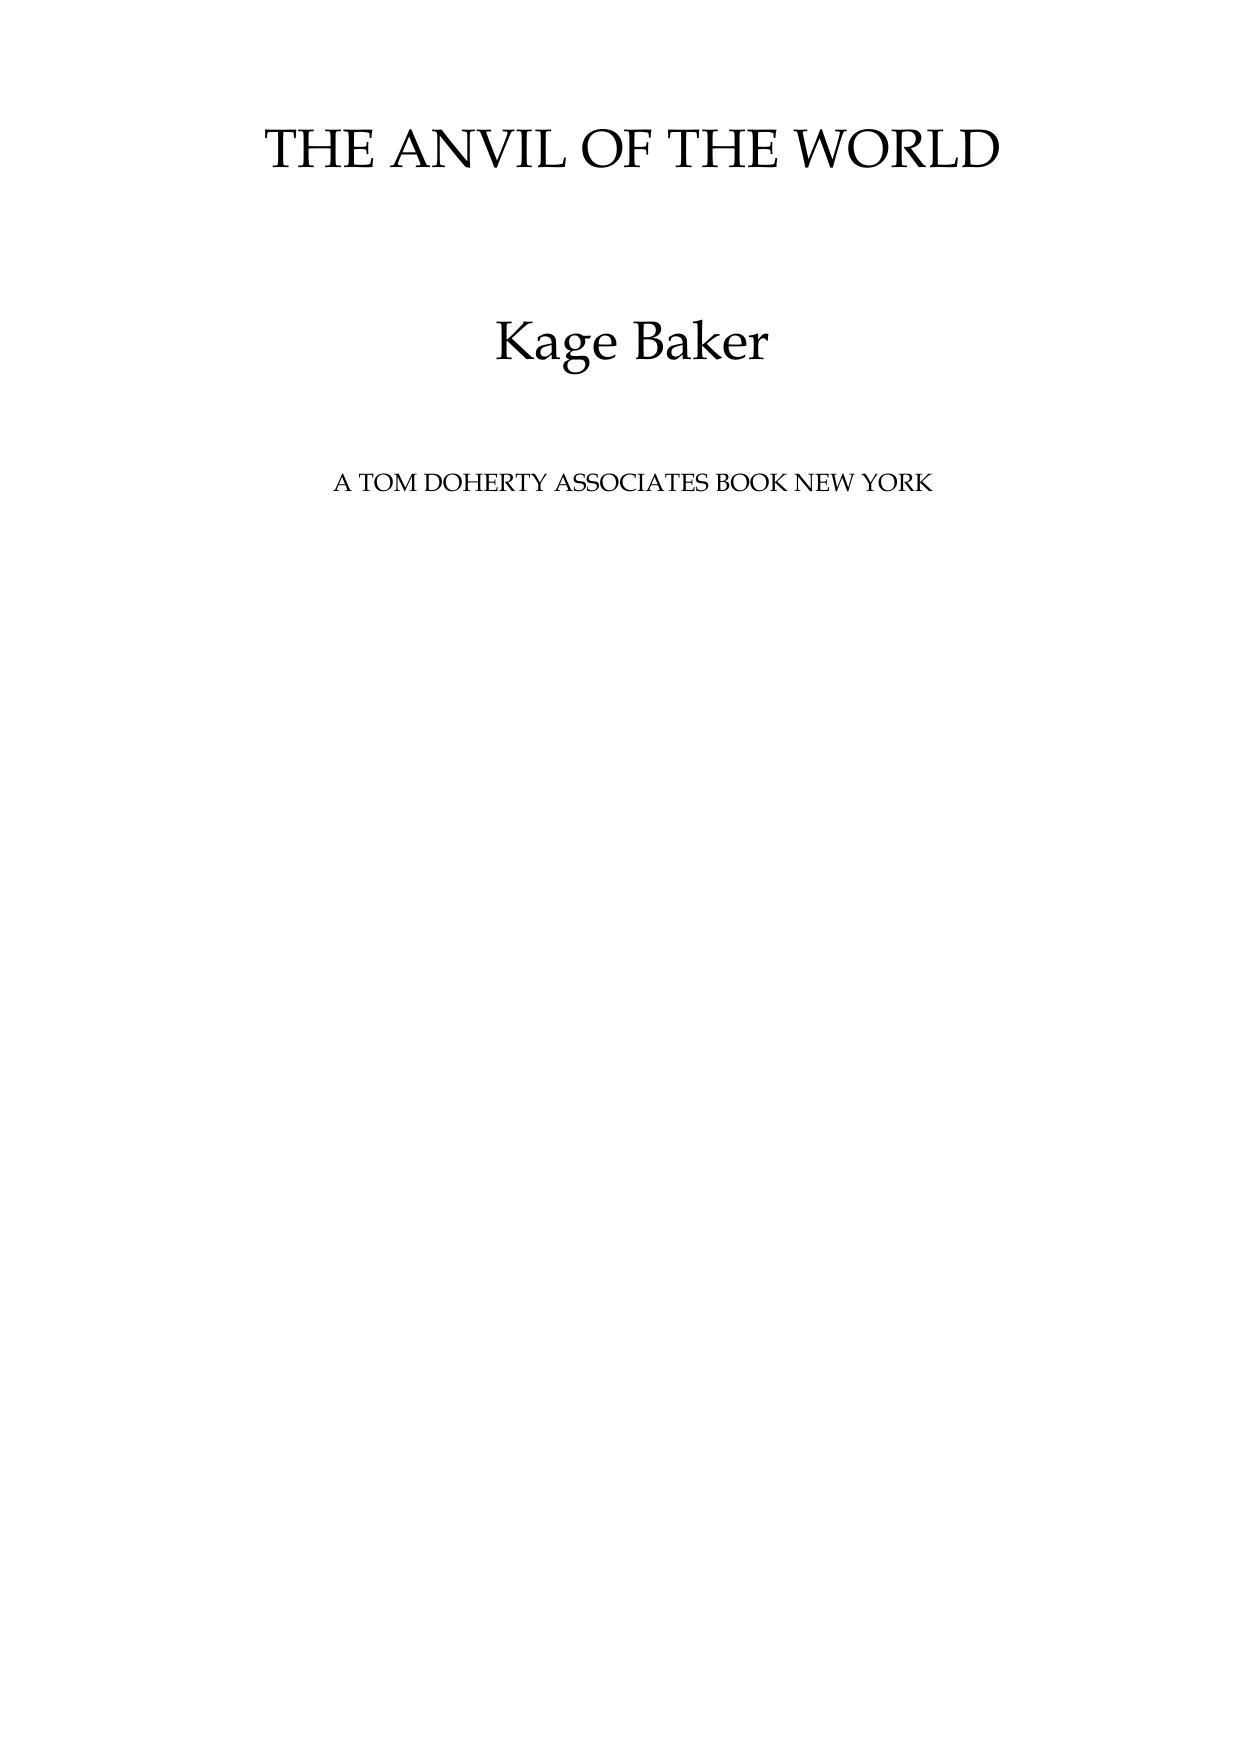 Baker, Kage - The Anvil of the World by Baker Kage